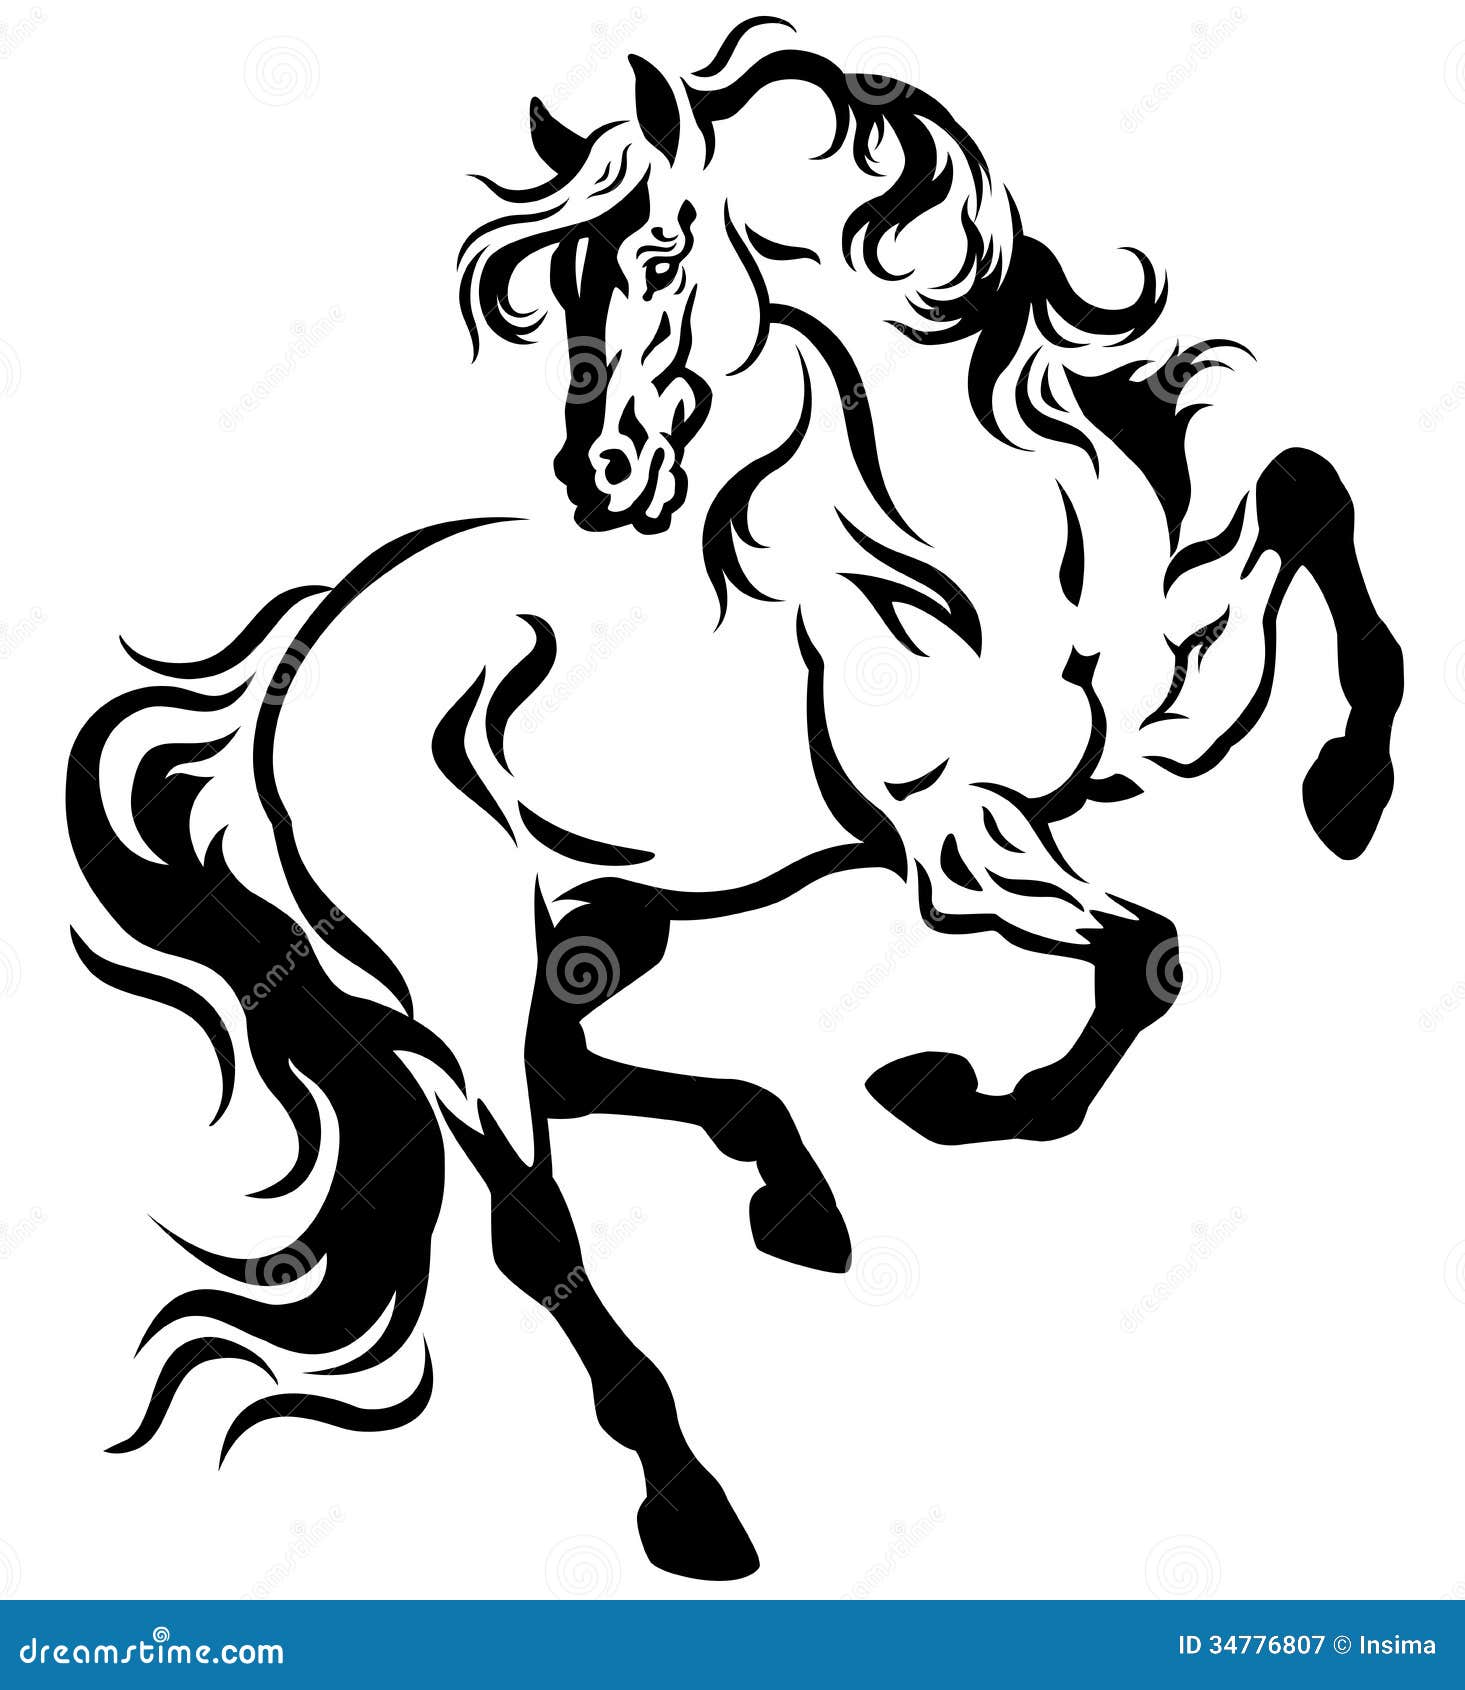 Horse animal tribal tattoo or racing sport mascot Horse animal icon of  tribal tattoo or racing sport mascot head of black  CanStock